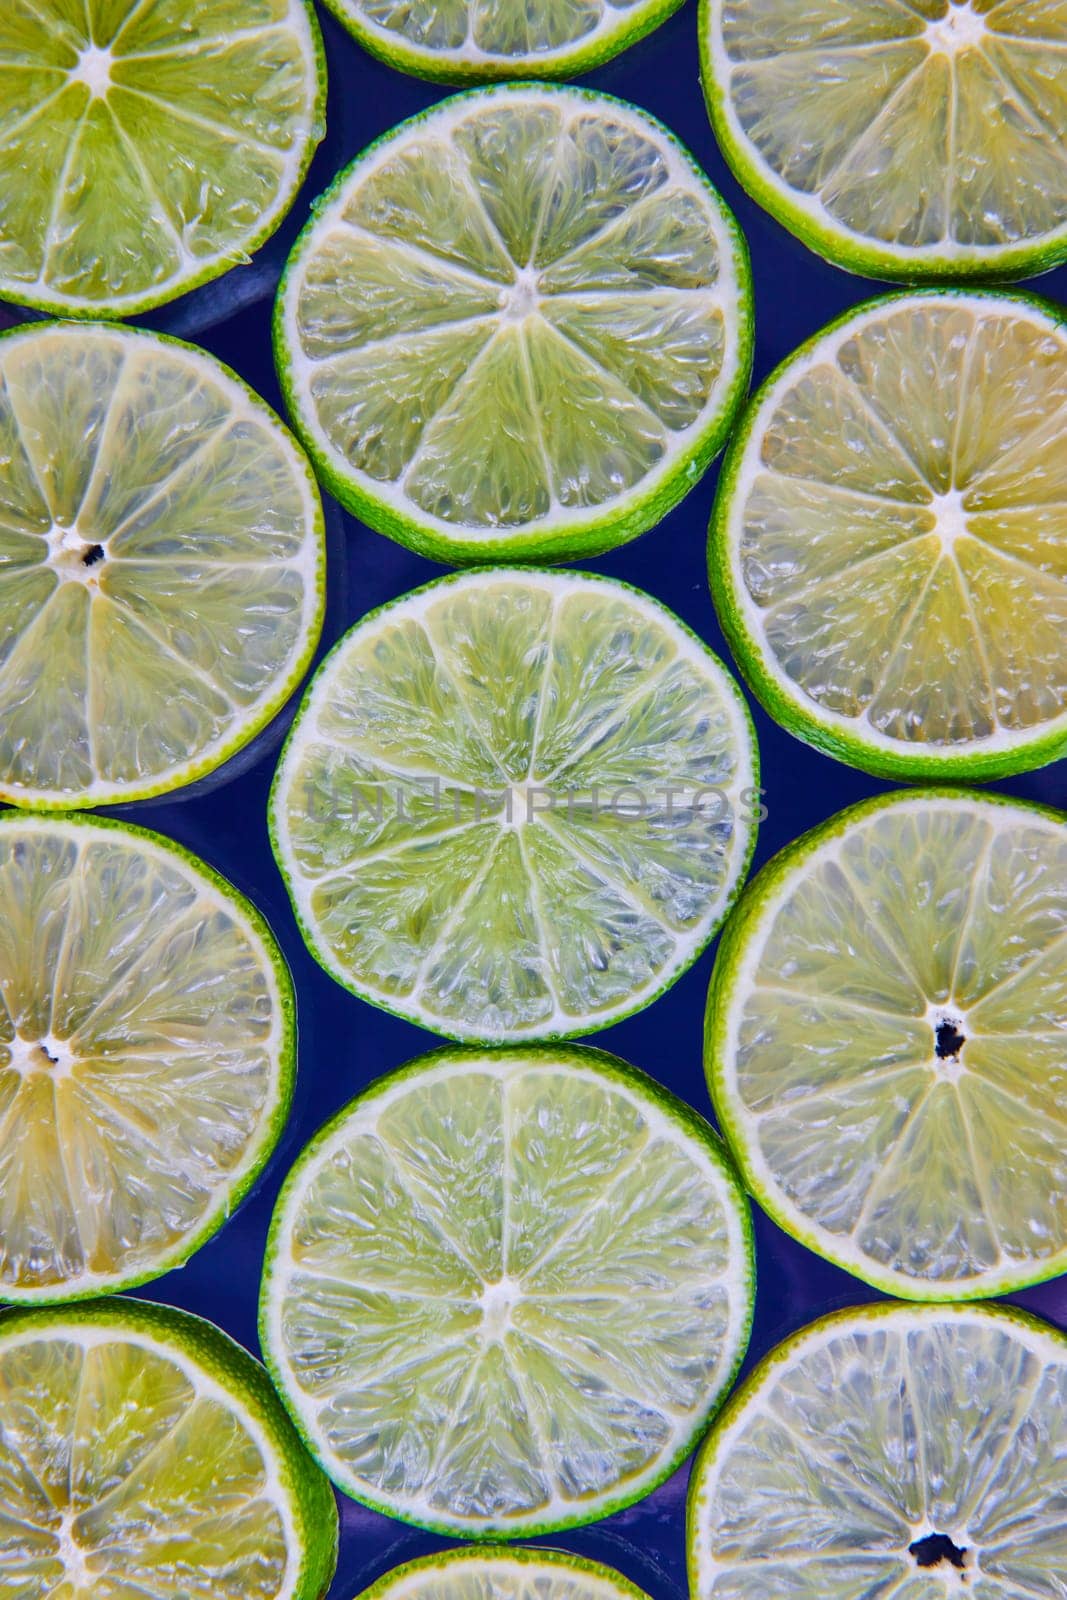 Image of Bright and see through green lime slices on navy blue background